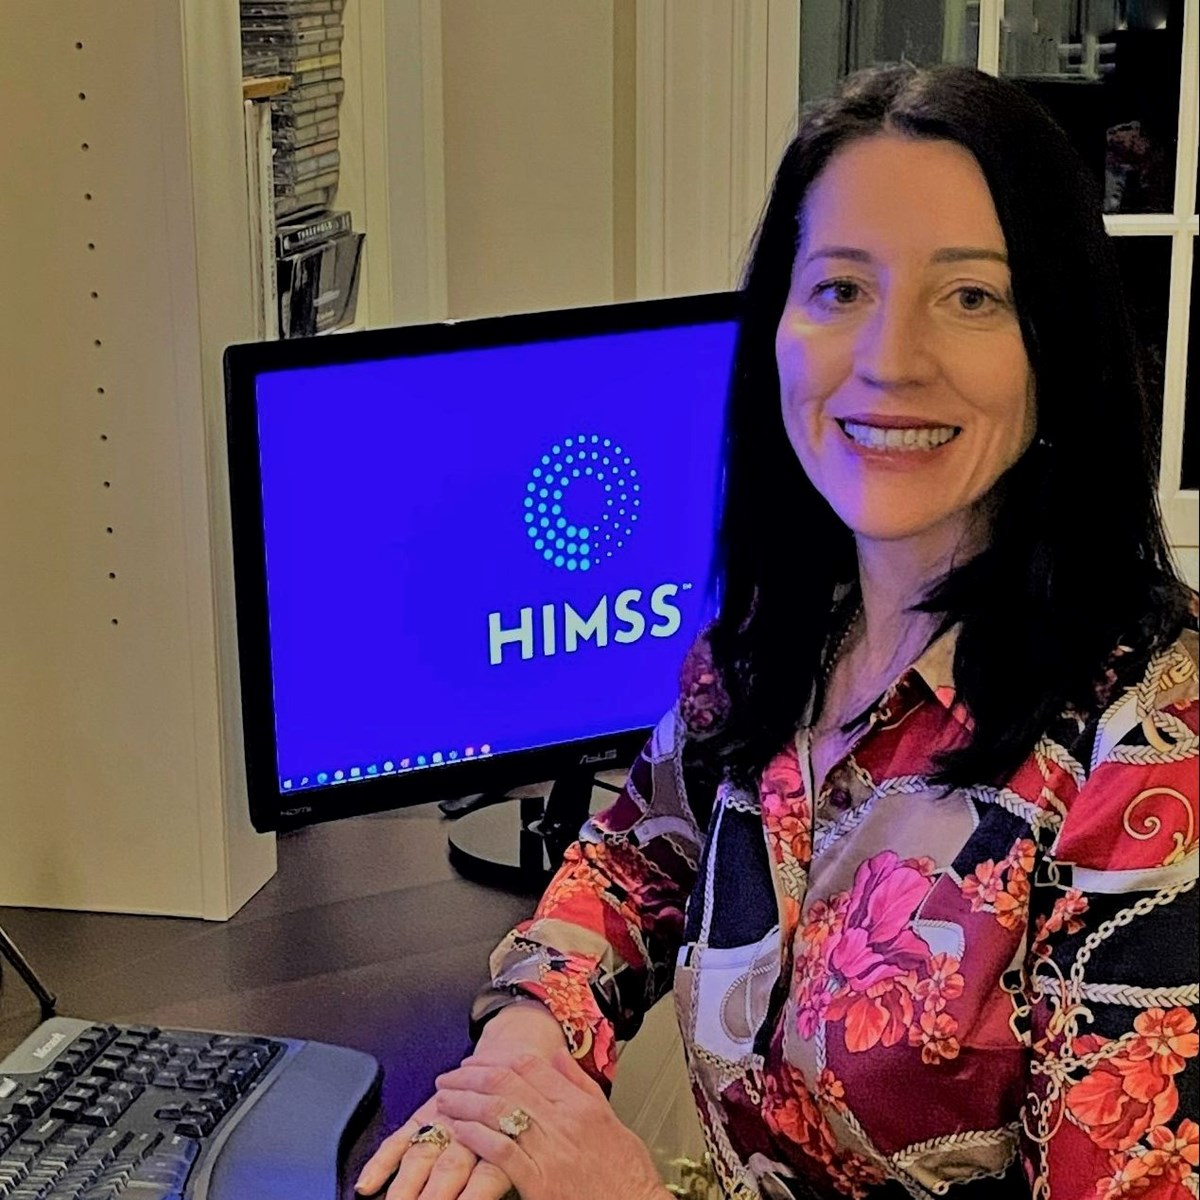 Toni Laracuente sits at a desk with a computer screen that displays the logo and letters HIMMS (Healthcare Information and Management Systems Society).